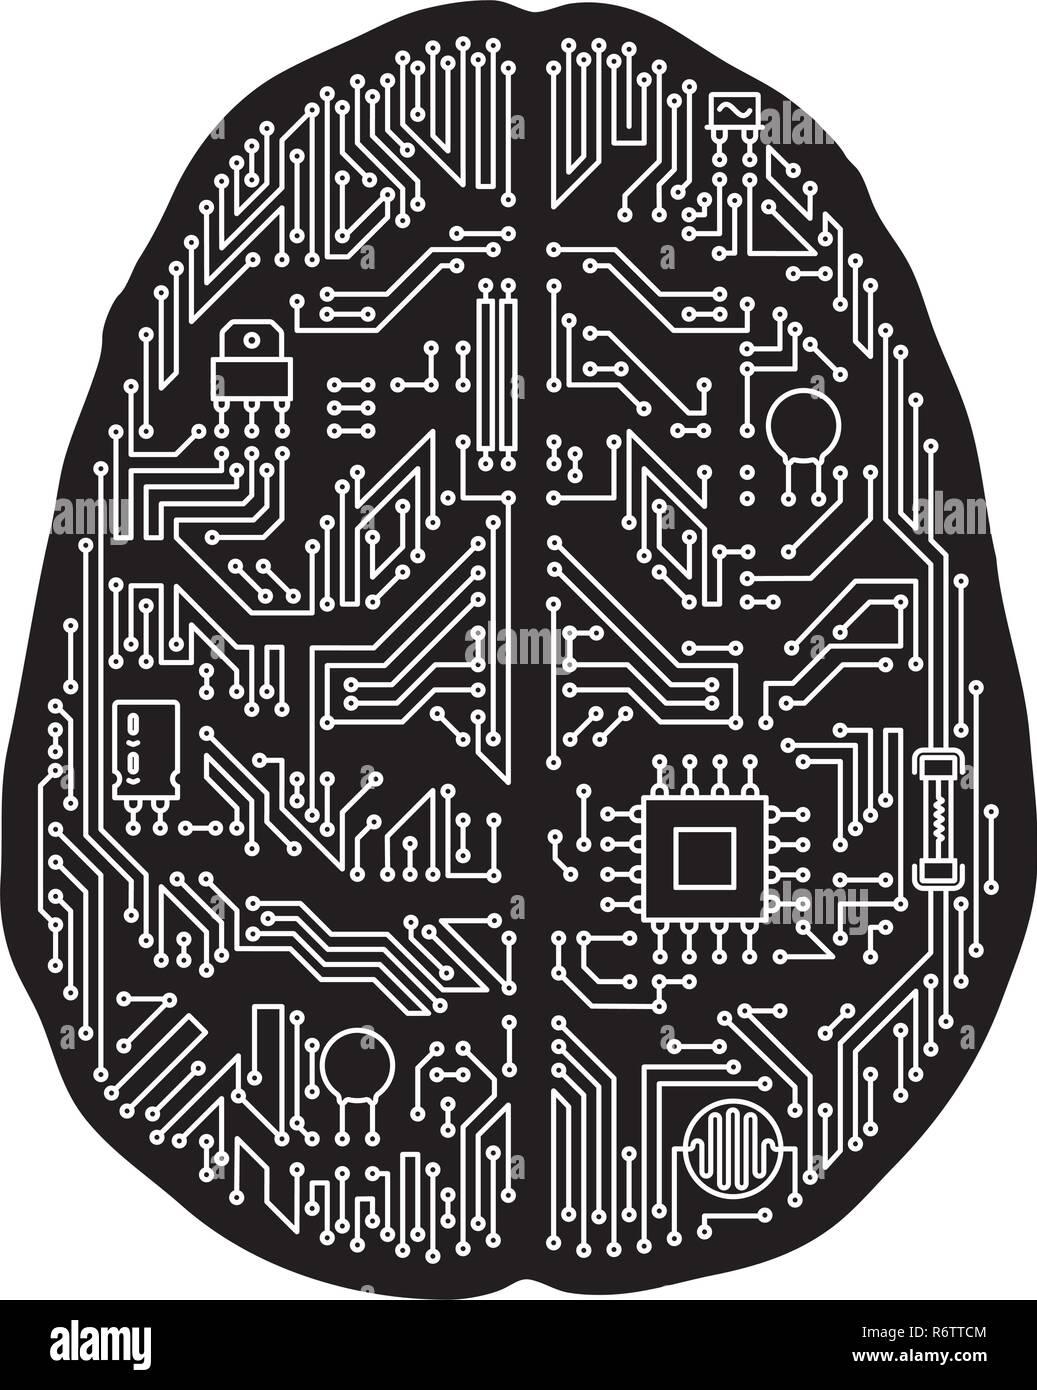 Motherboard human brain shaped isolated vector illustration. Black and white artificial intelligence and technology concept. Stock Vector